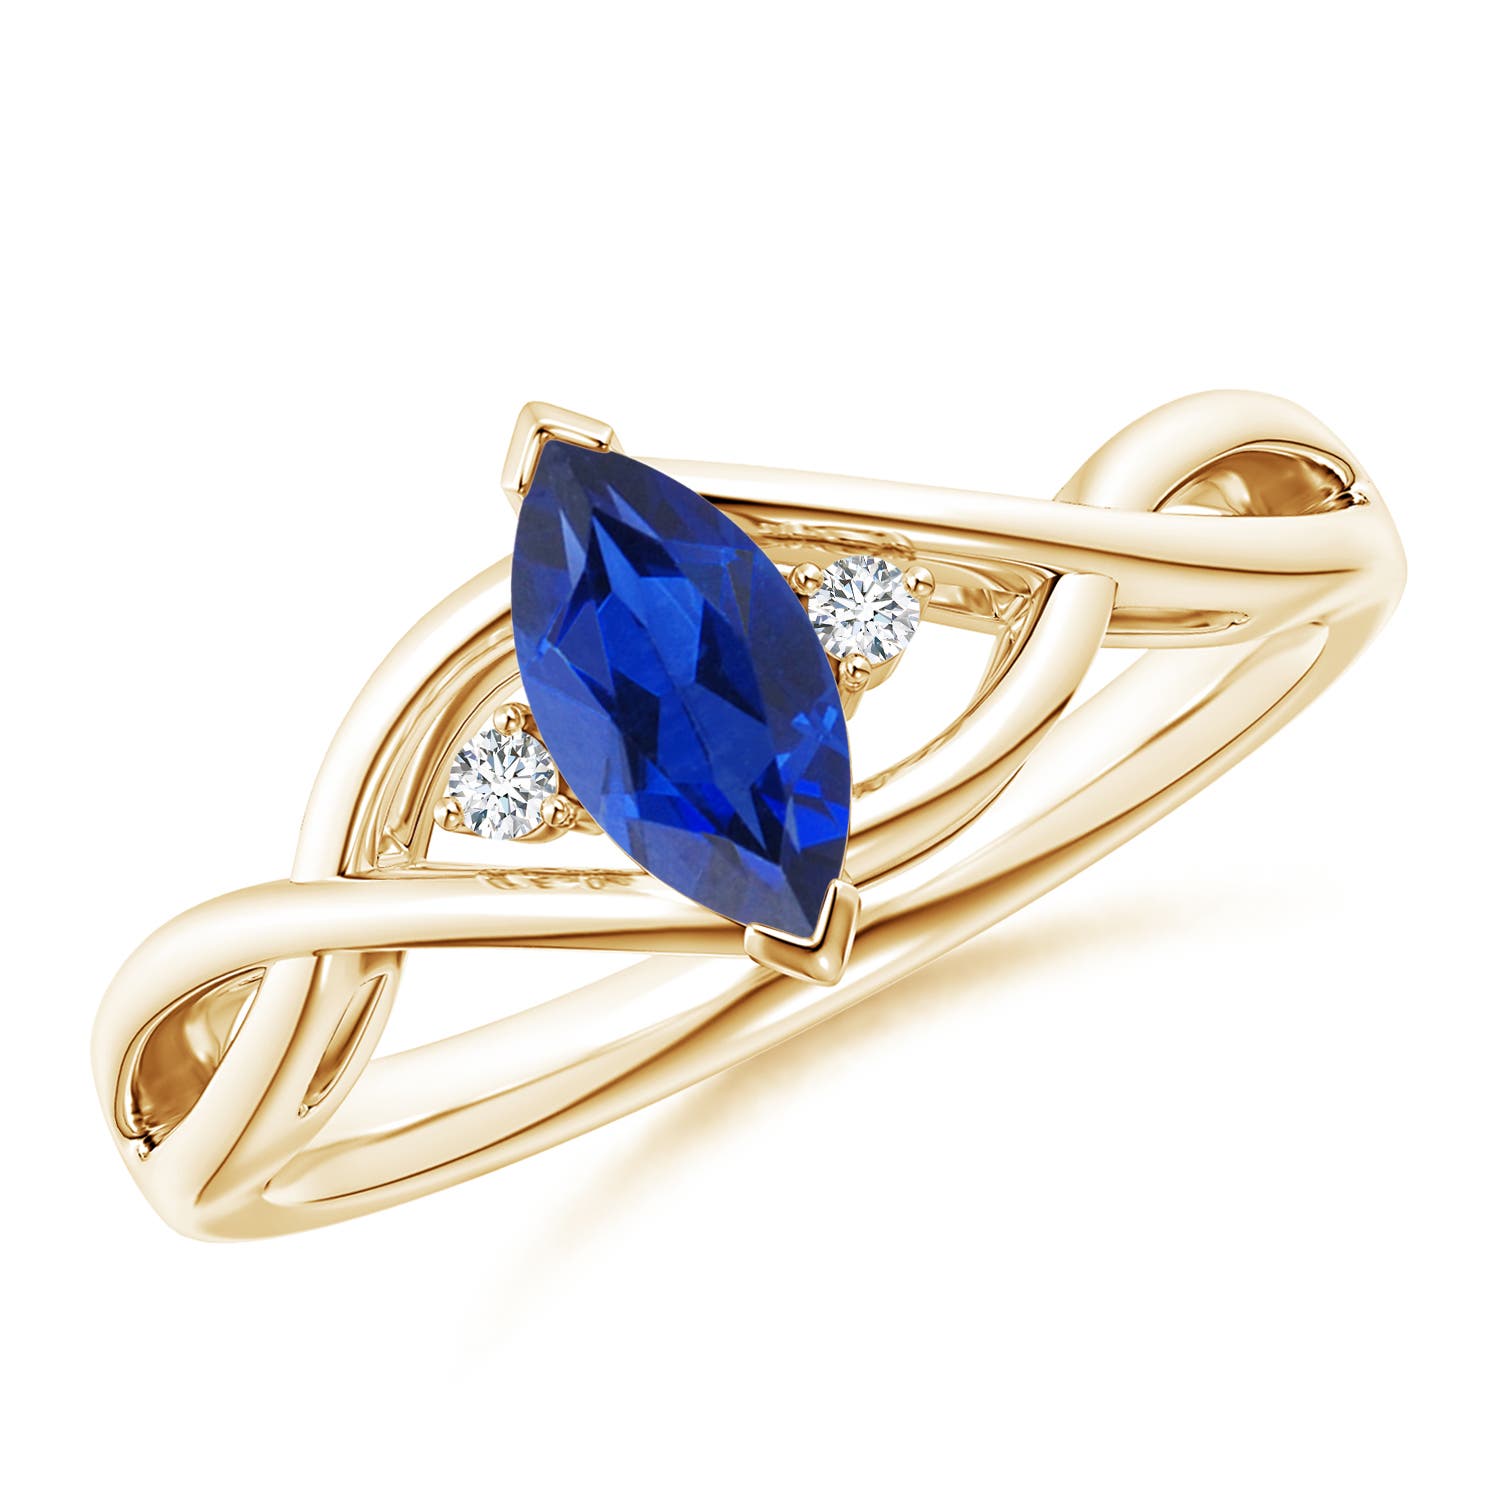 AAA - Blue Sapphire / 0.63 CT / 14 KT Yellow Gold